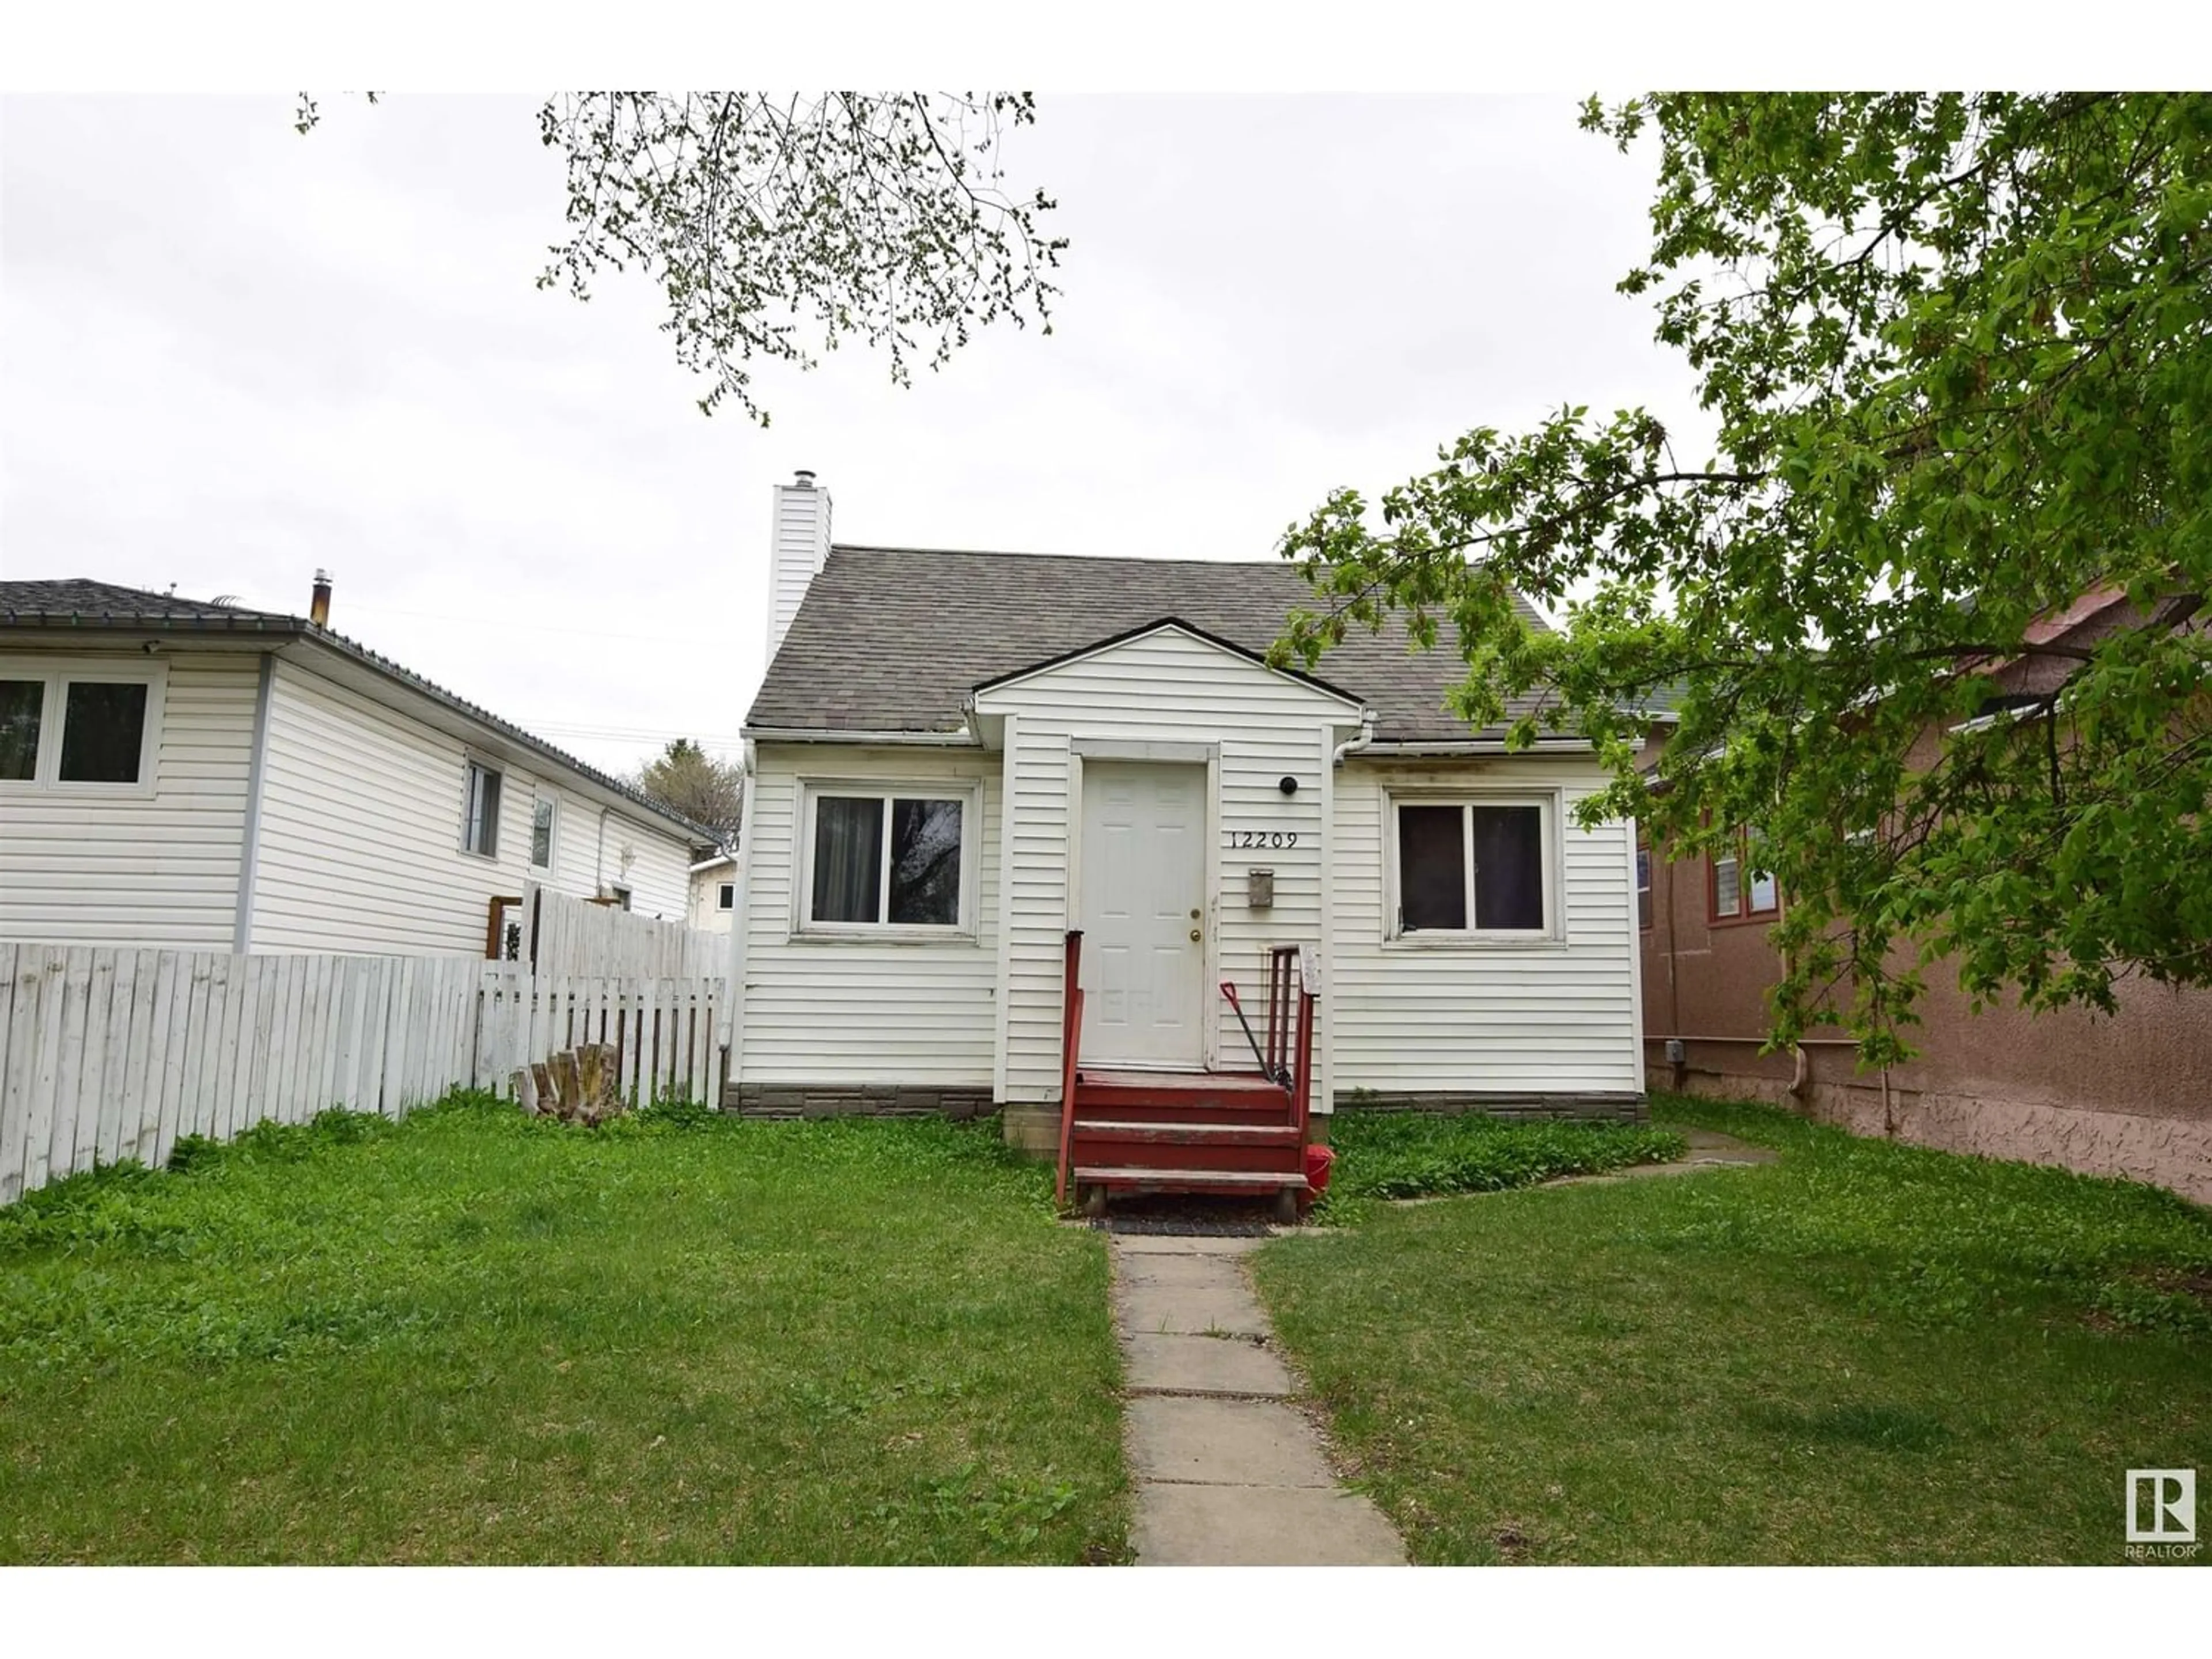 Frontside or backside of a home for 12209 92 ST NW, Edmonton Alberta T5G1B4